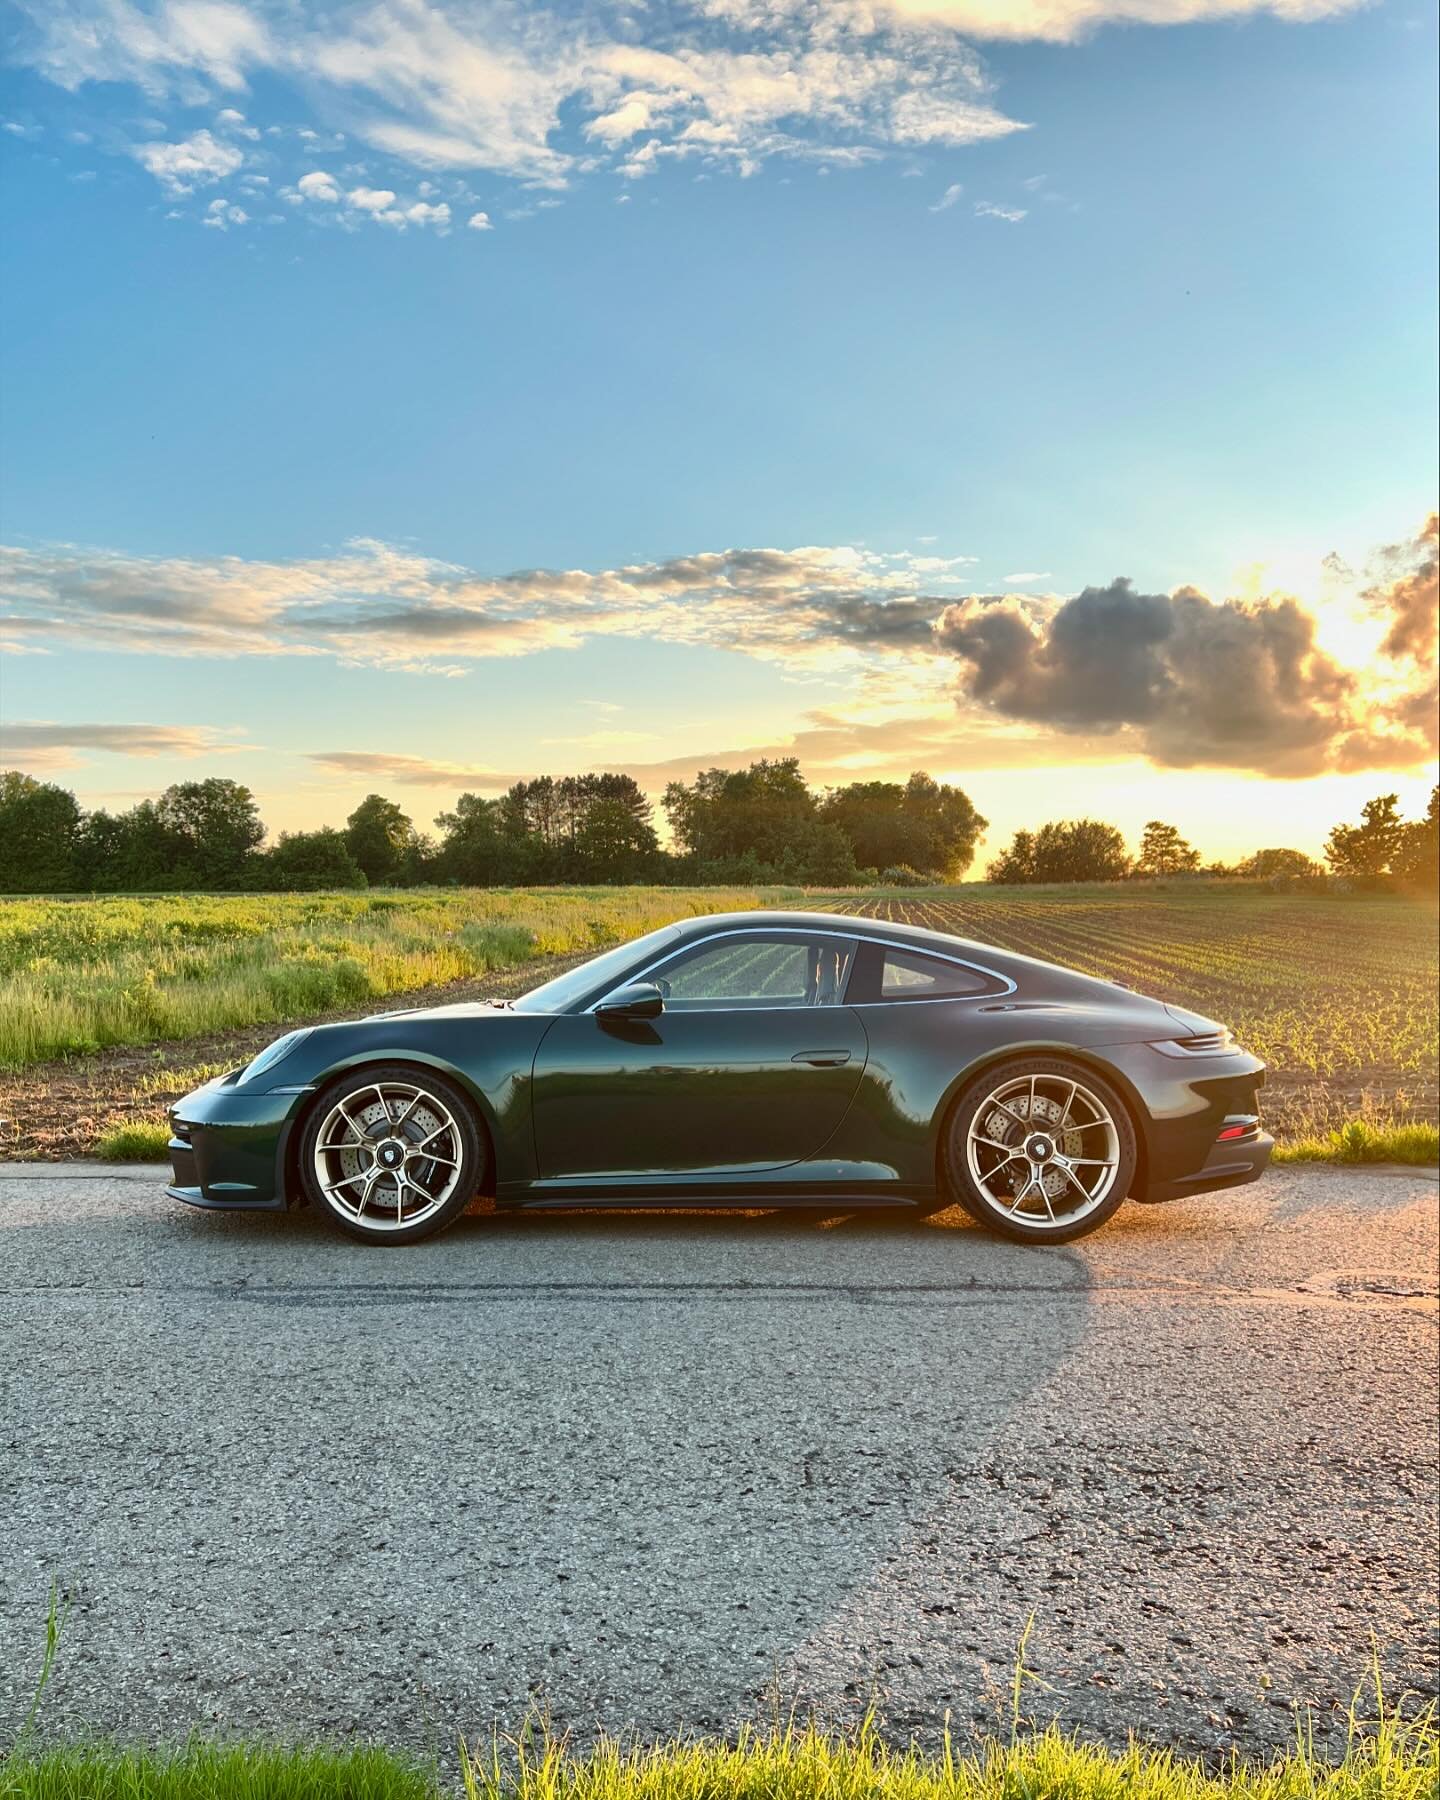 Shades of Jet Green Metallic.&thinsp;
&thinsp;
More about the brand new GT3 Touring from 2024 on our website - and about the Spyder RS soon.&thinsp;
&thinsp;
#dlsautomobile #porsche992gt3 #gt3touring #gt3 #painttosample #pts #jetgreen #✈️